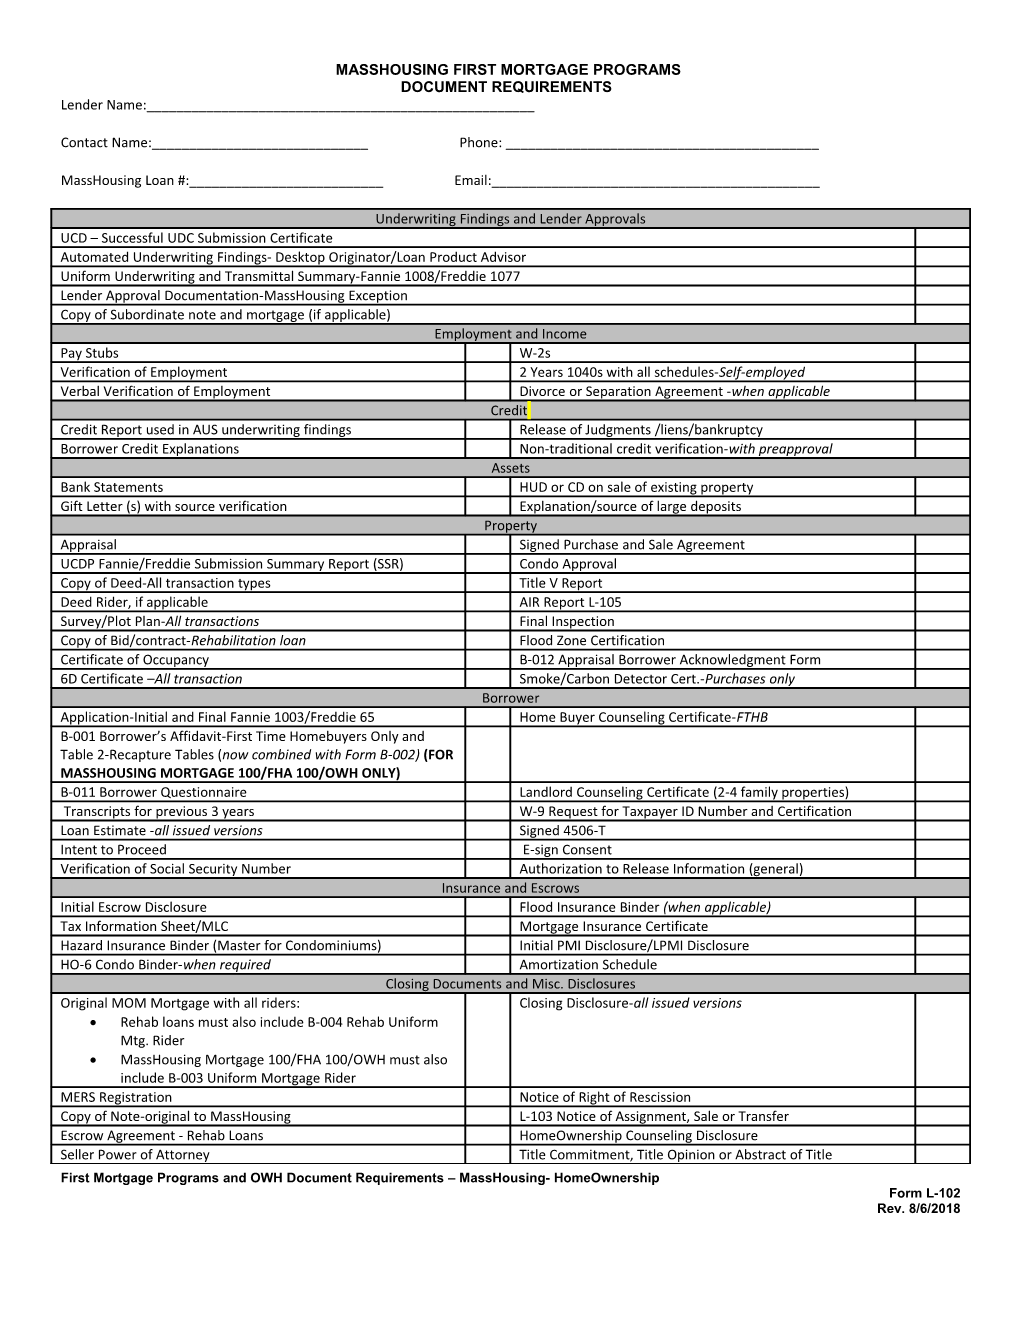 Form #L-102: First Mortgage Programs Document Checklist